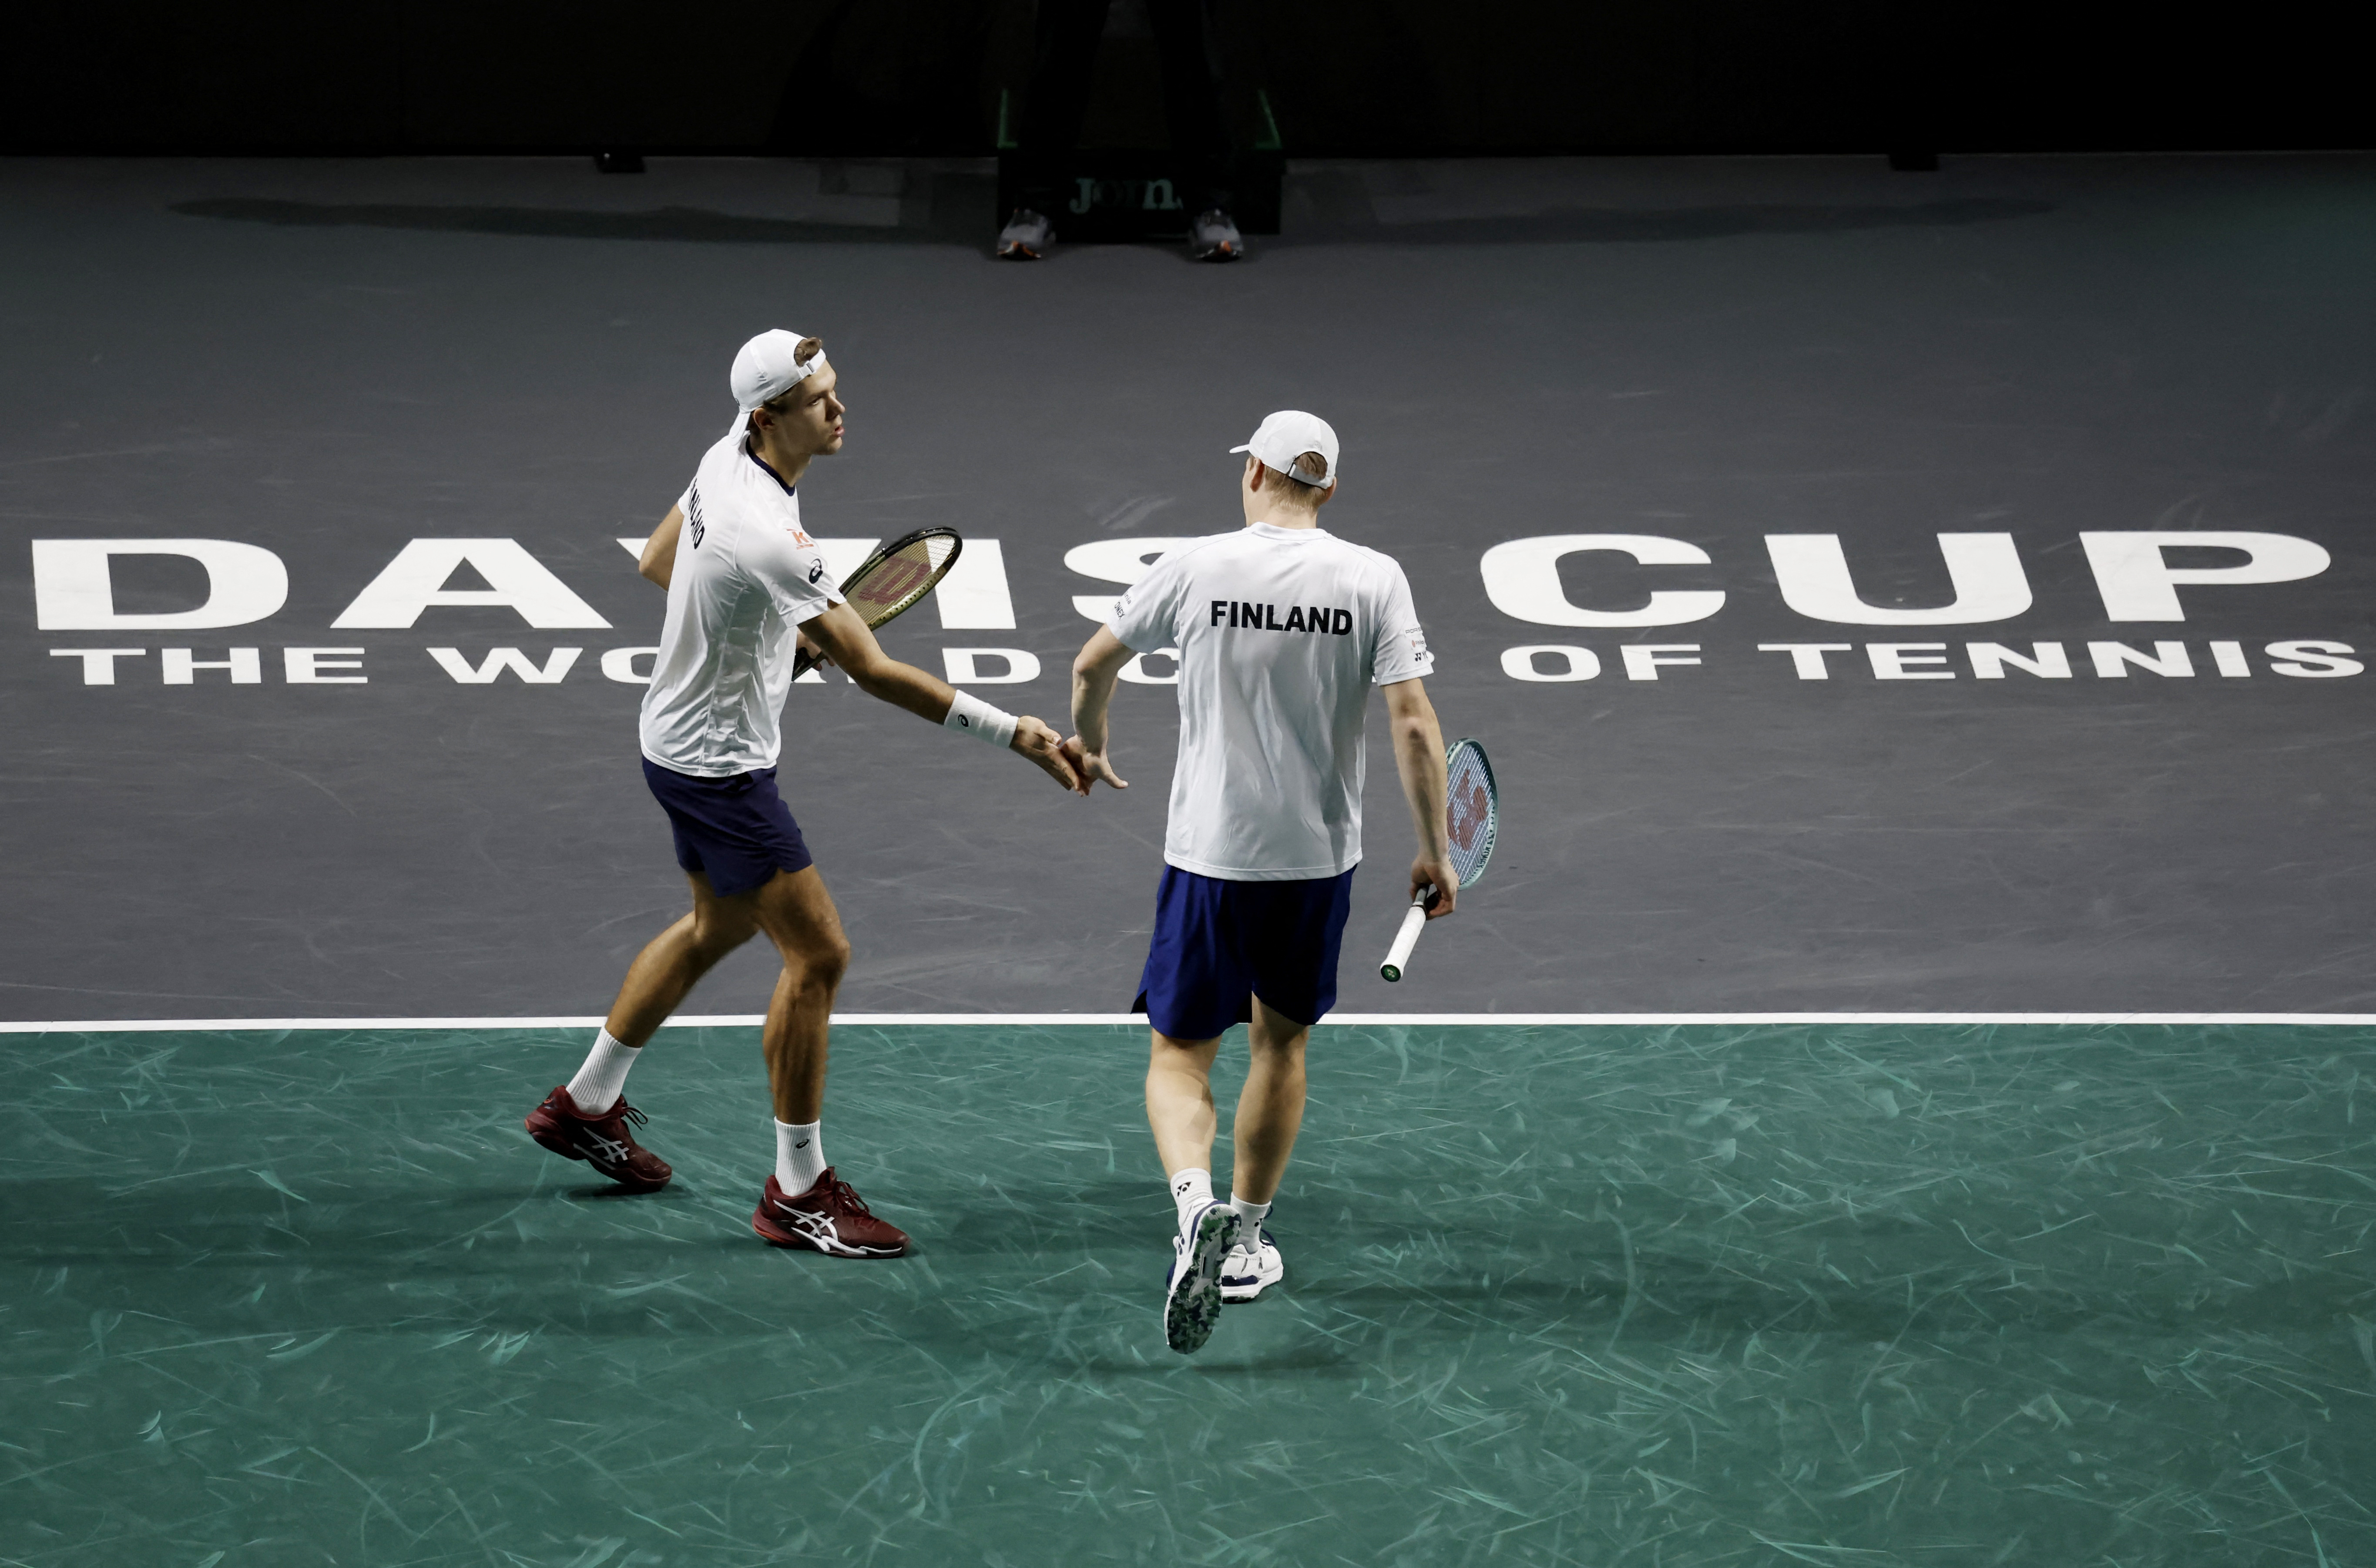 Finland hope to continue Davis Cup fairytale and inspire new generation Reuters